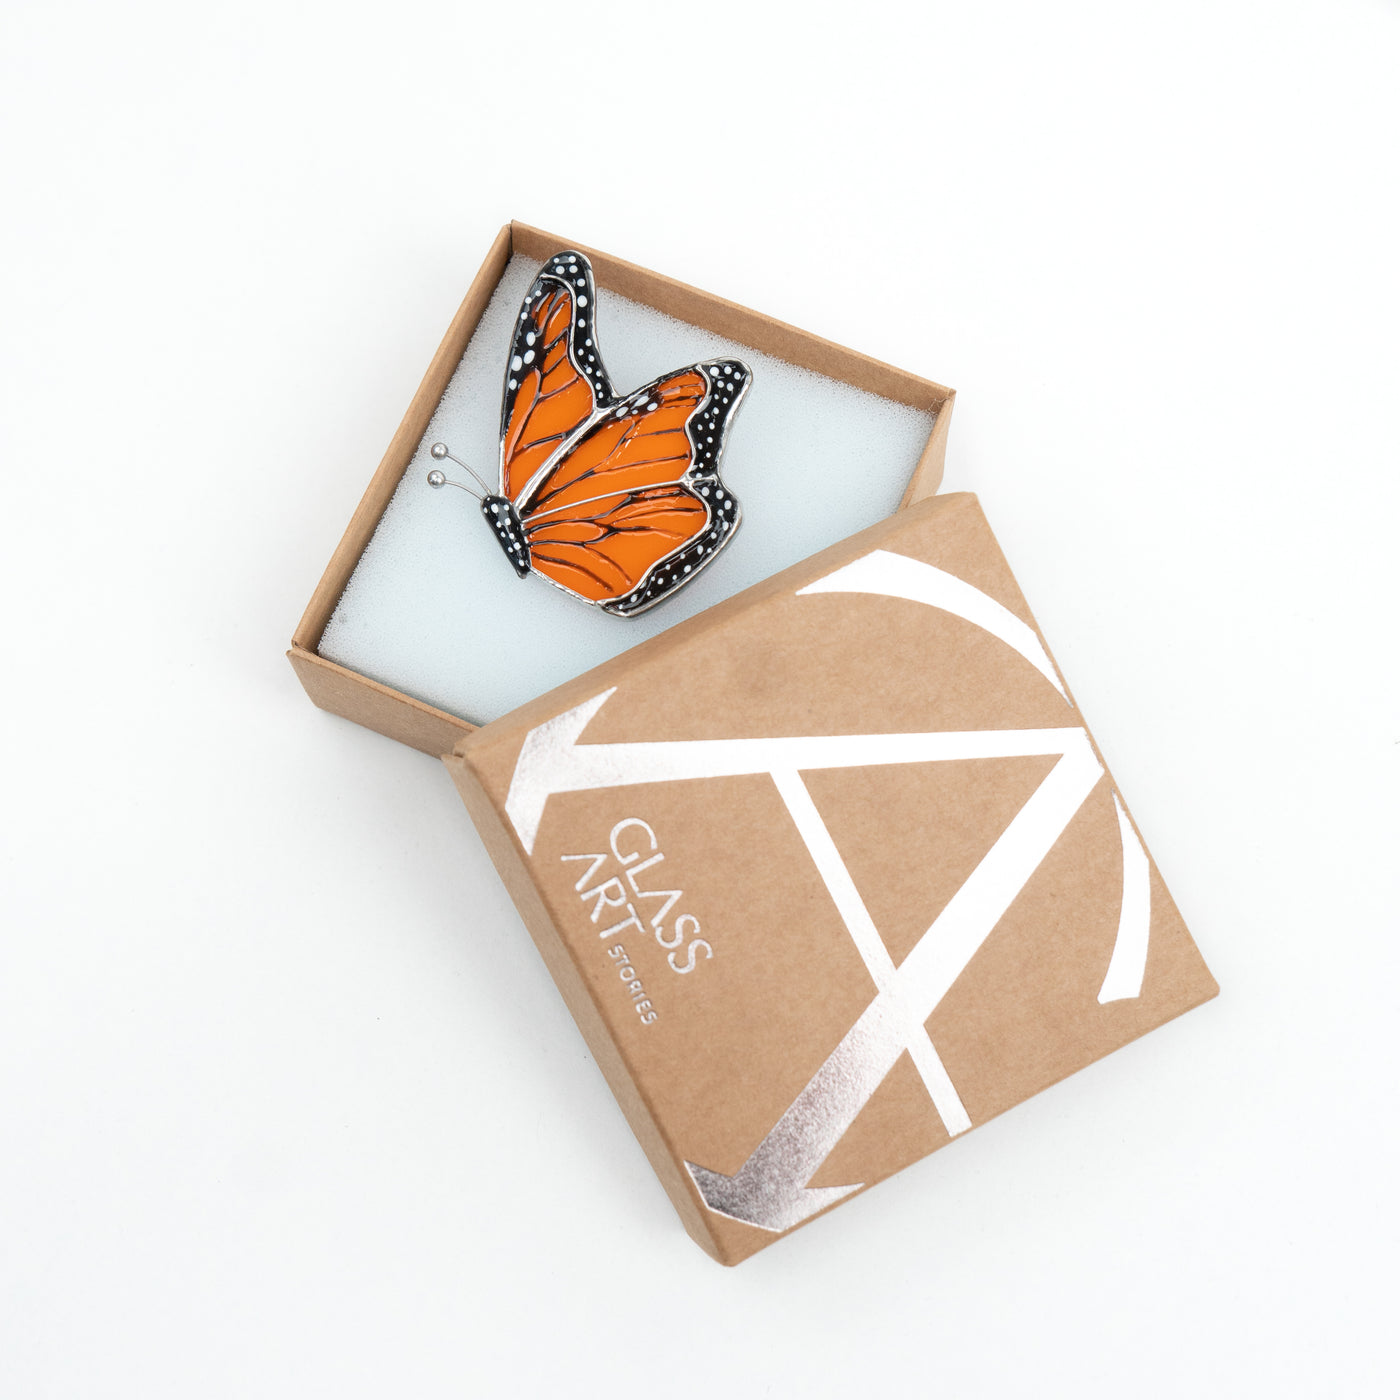 Stained glass side-view monarch butterfly pin in a brand box